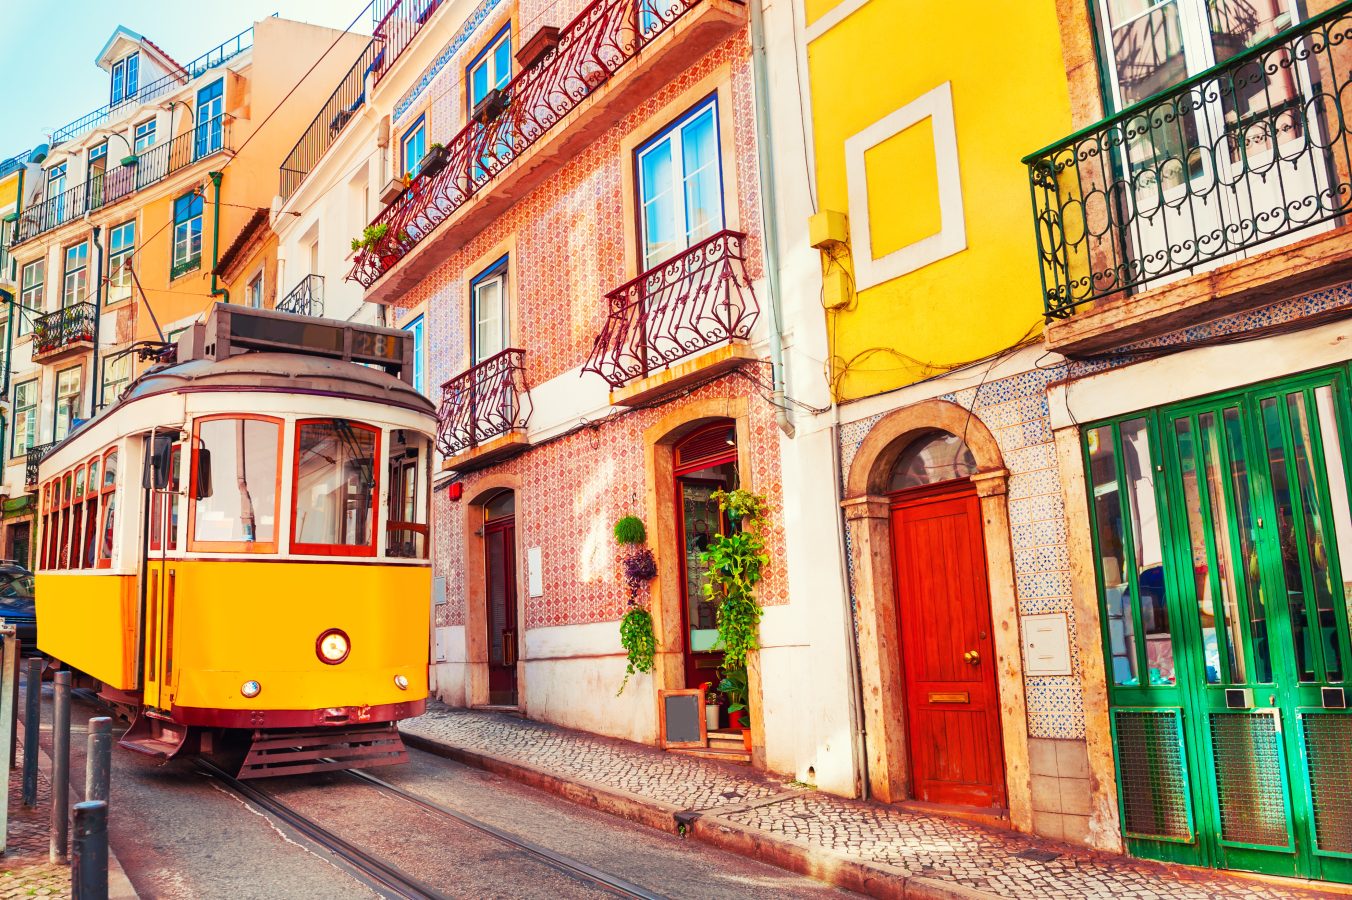 Yellow vintage tram on the street in Lisbon, Portugal. Famous spring break destinations for travel